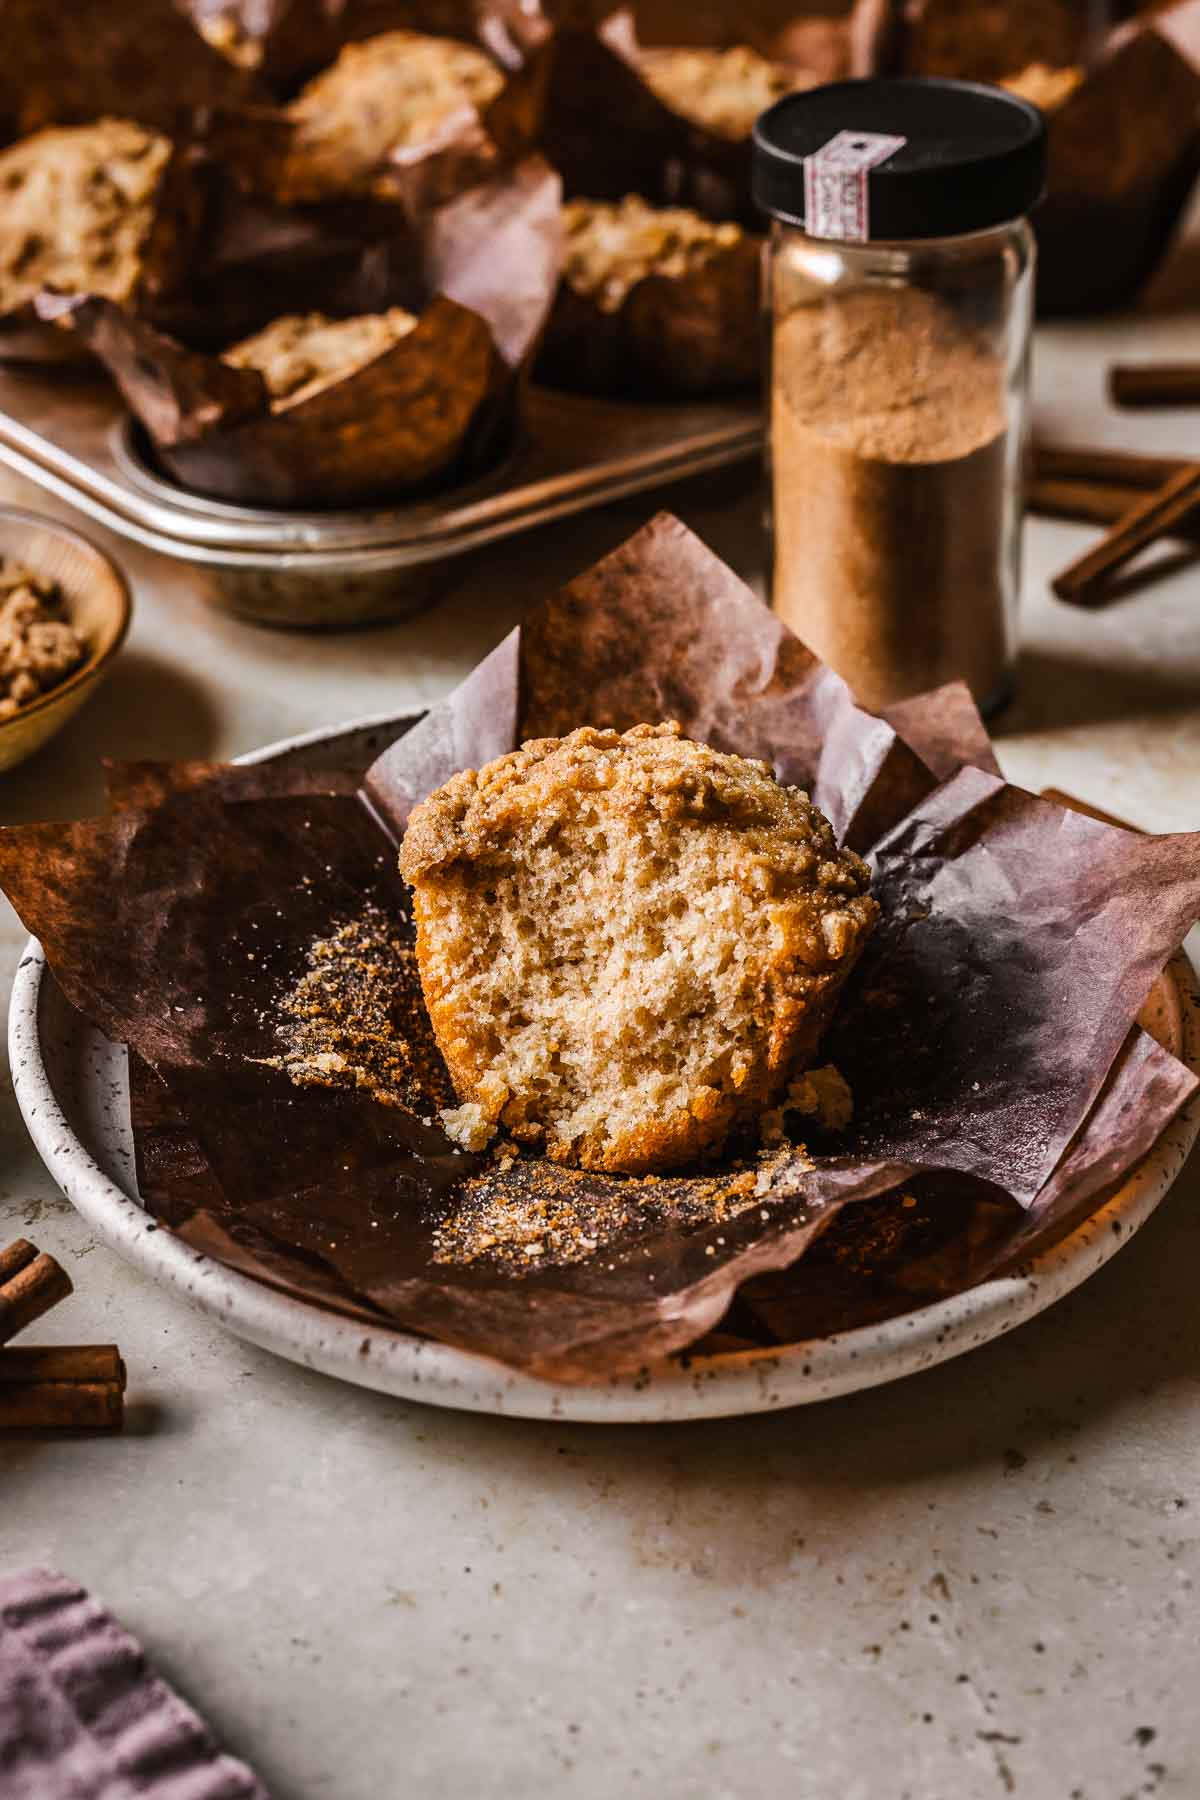 A cinnamon streusel muffin on brown paper parchment squares on a white ceramic plate. In the background is a glass jar of cinnamon sugar and a full tin of baked muffins.